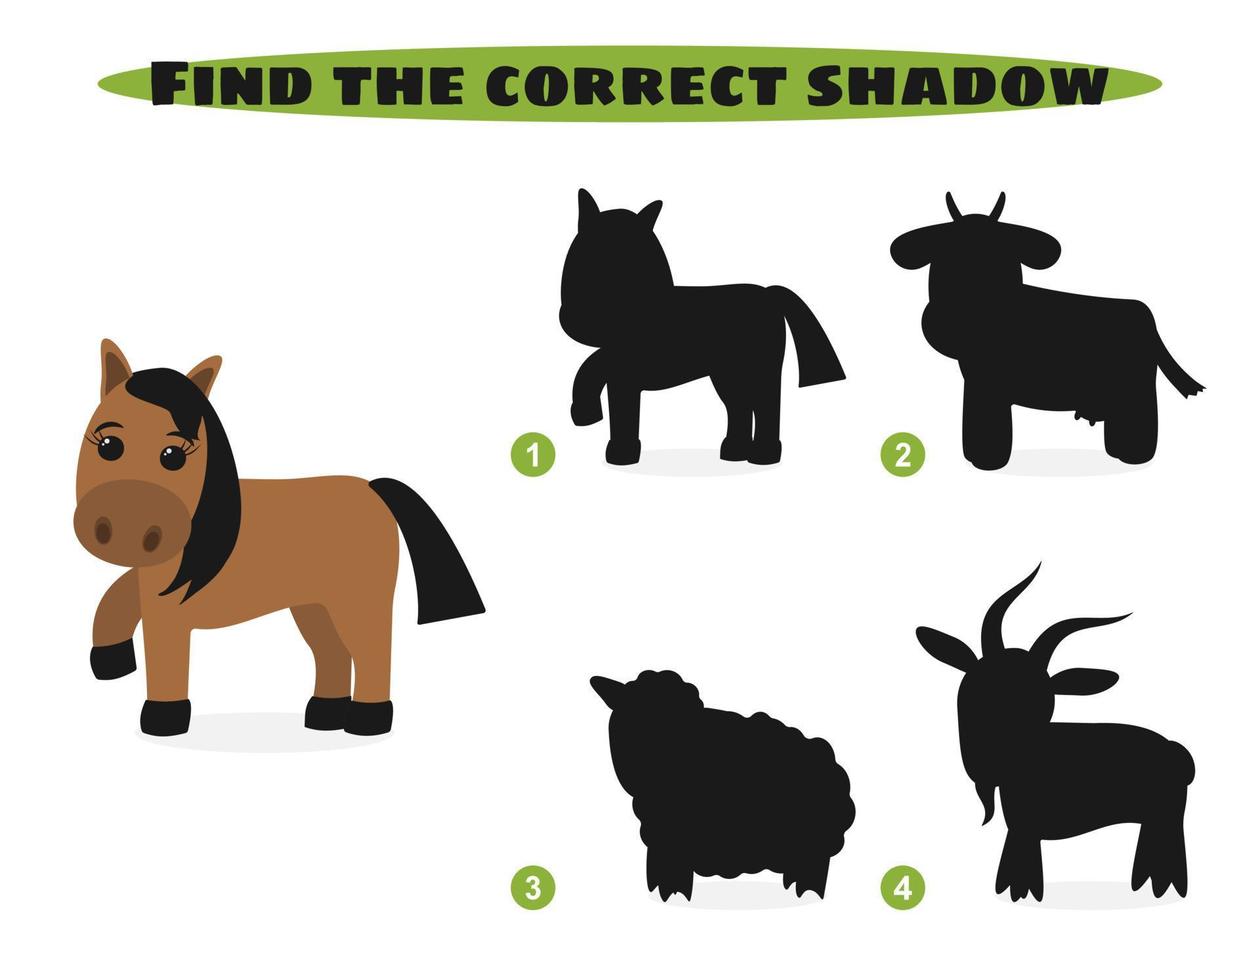 Find correct shadow. Funny cartoon farm animals. Education and activity game for children. Vector illustration.